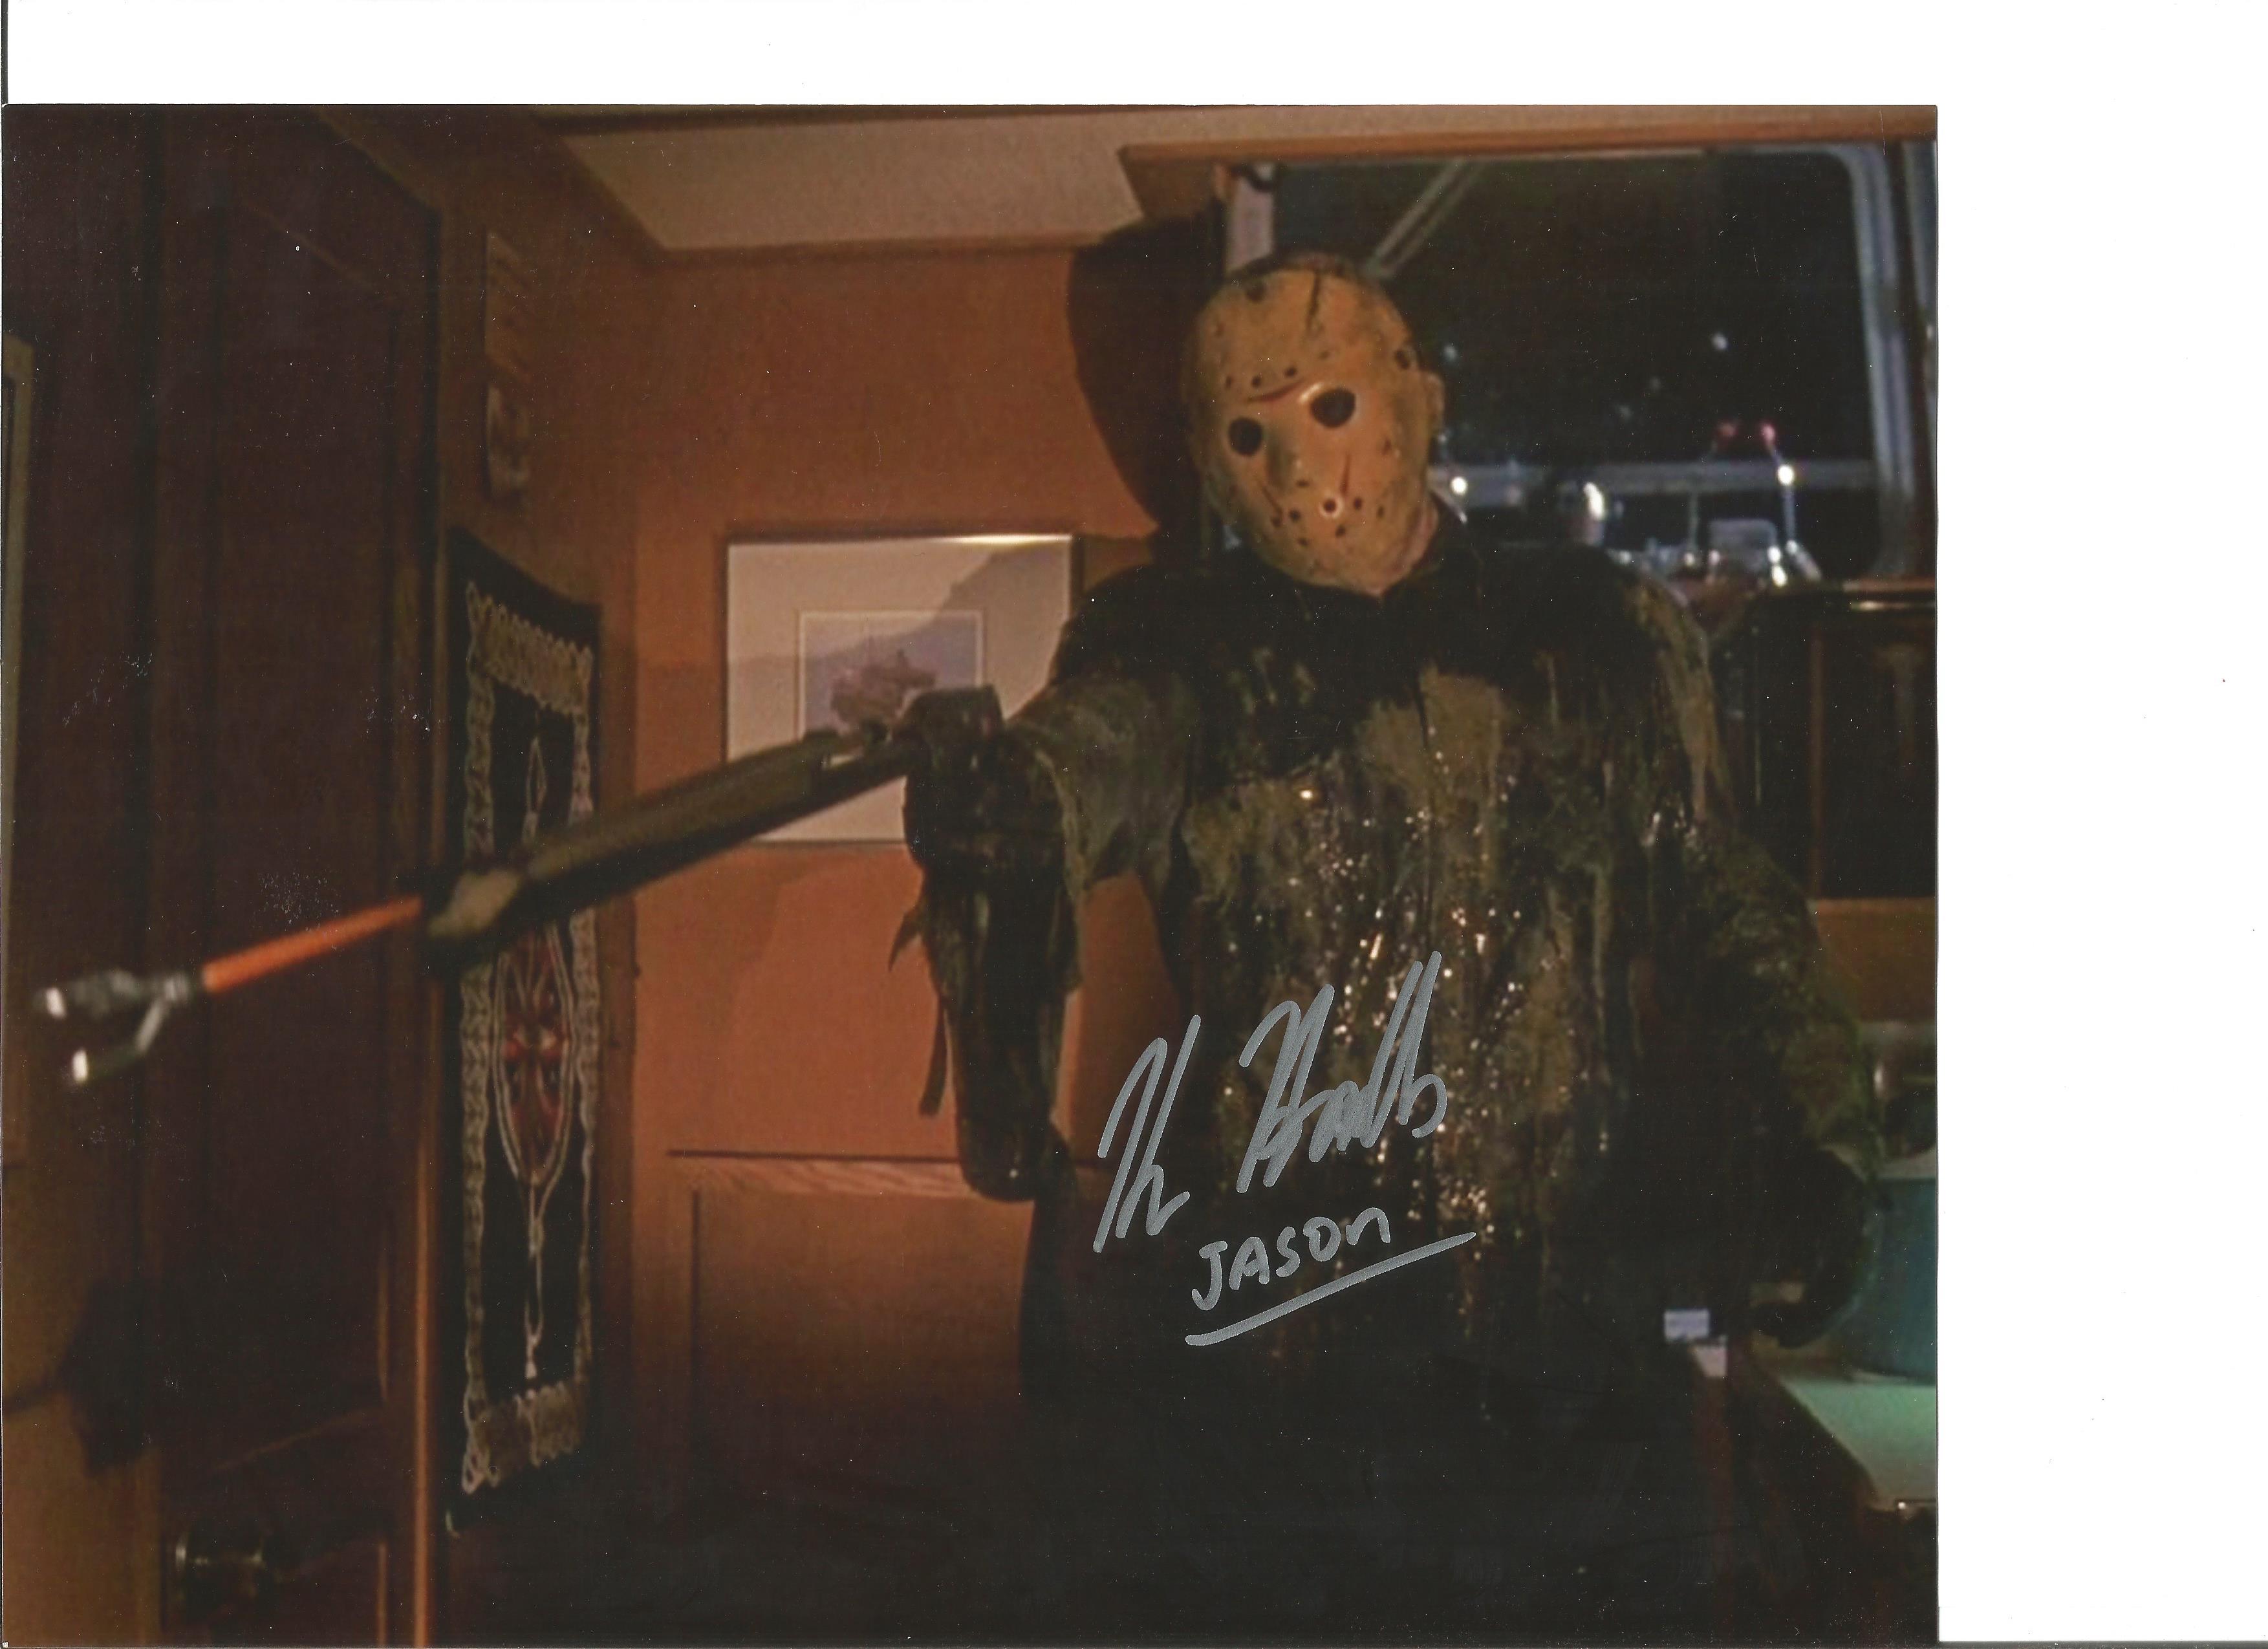 Kane Hodder Friday 13th hand signed 10x8 photo. This beautiful hand signed photo is signed by Kane